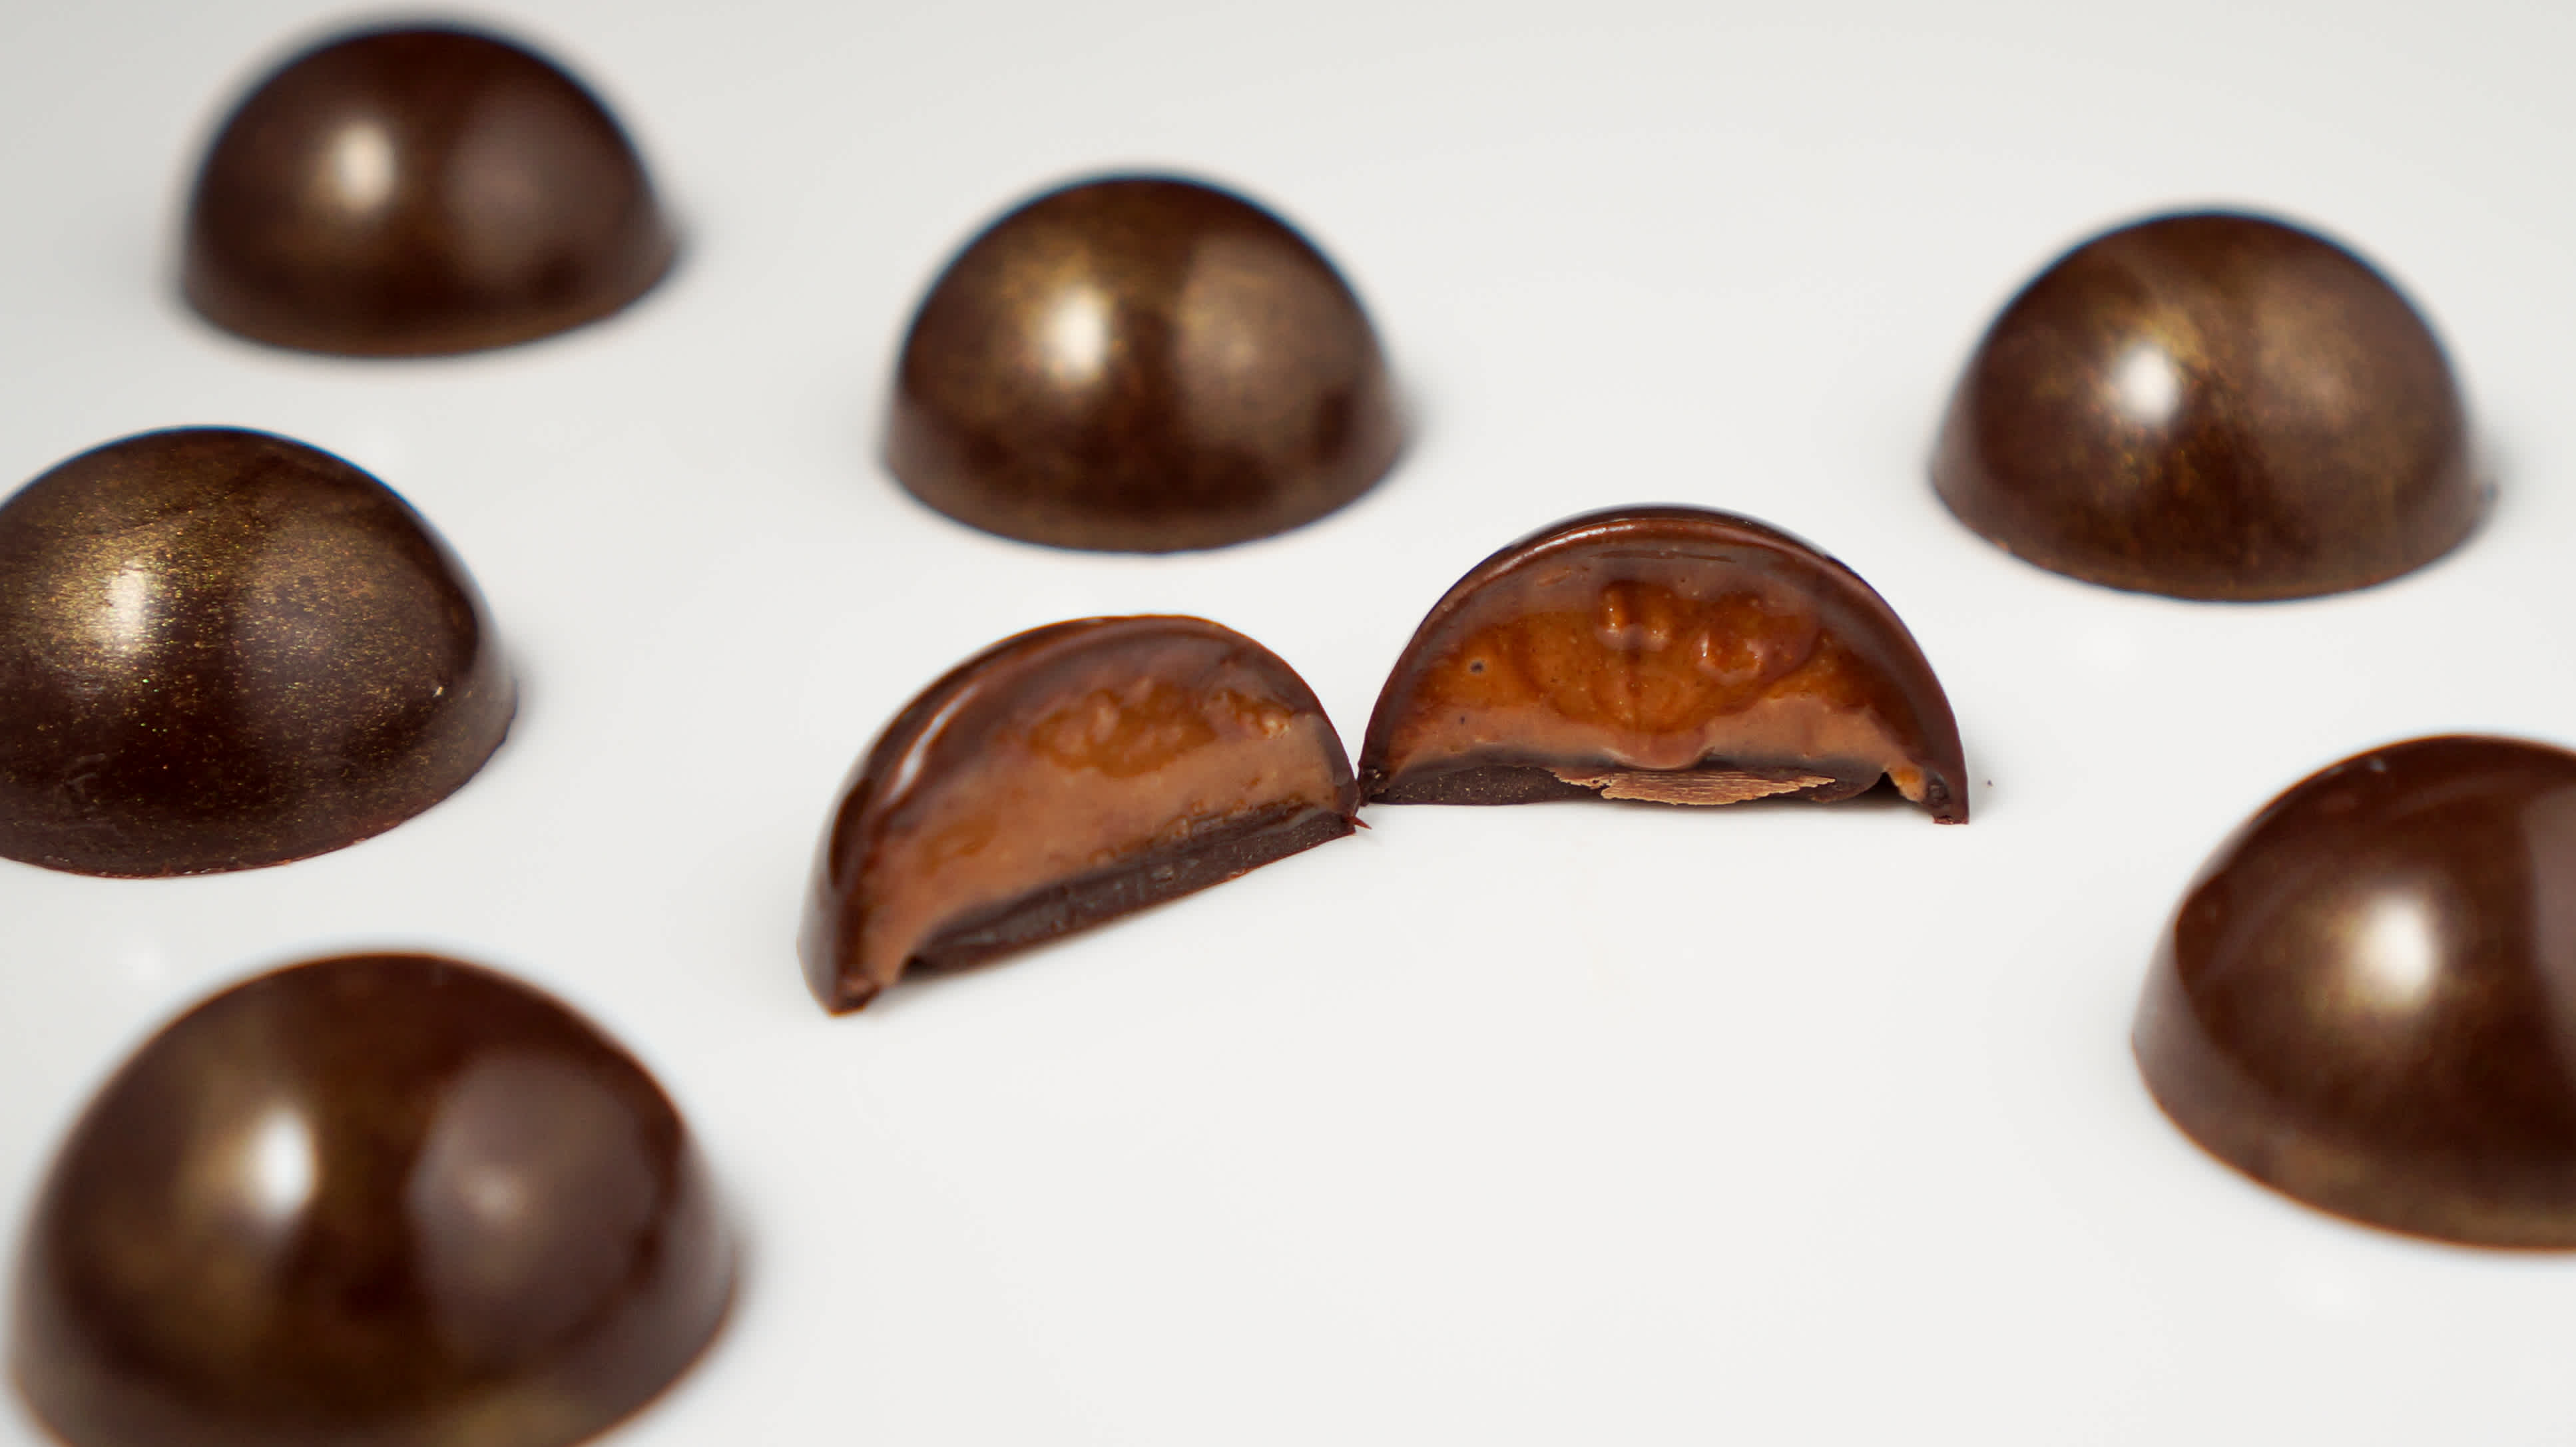 Moulded chocolate bonbons